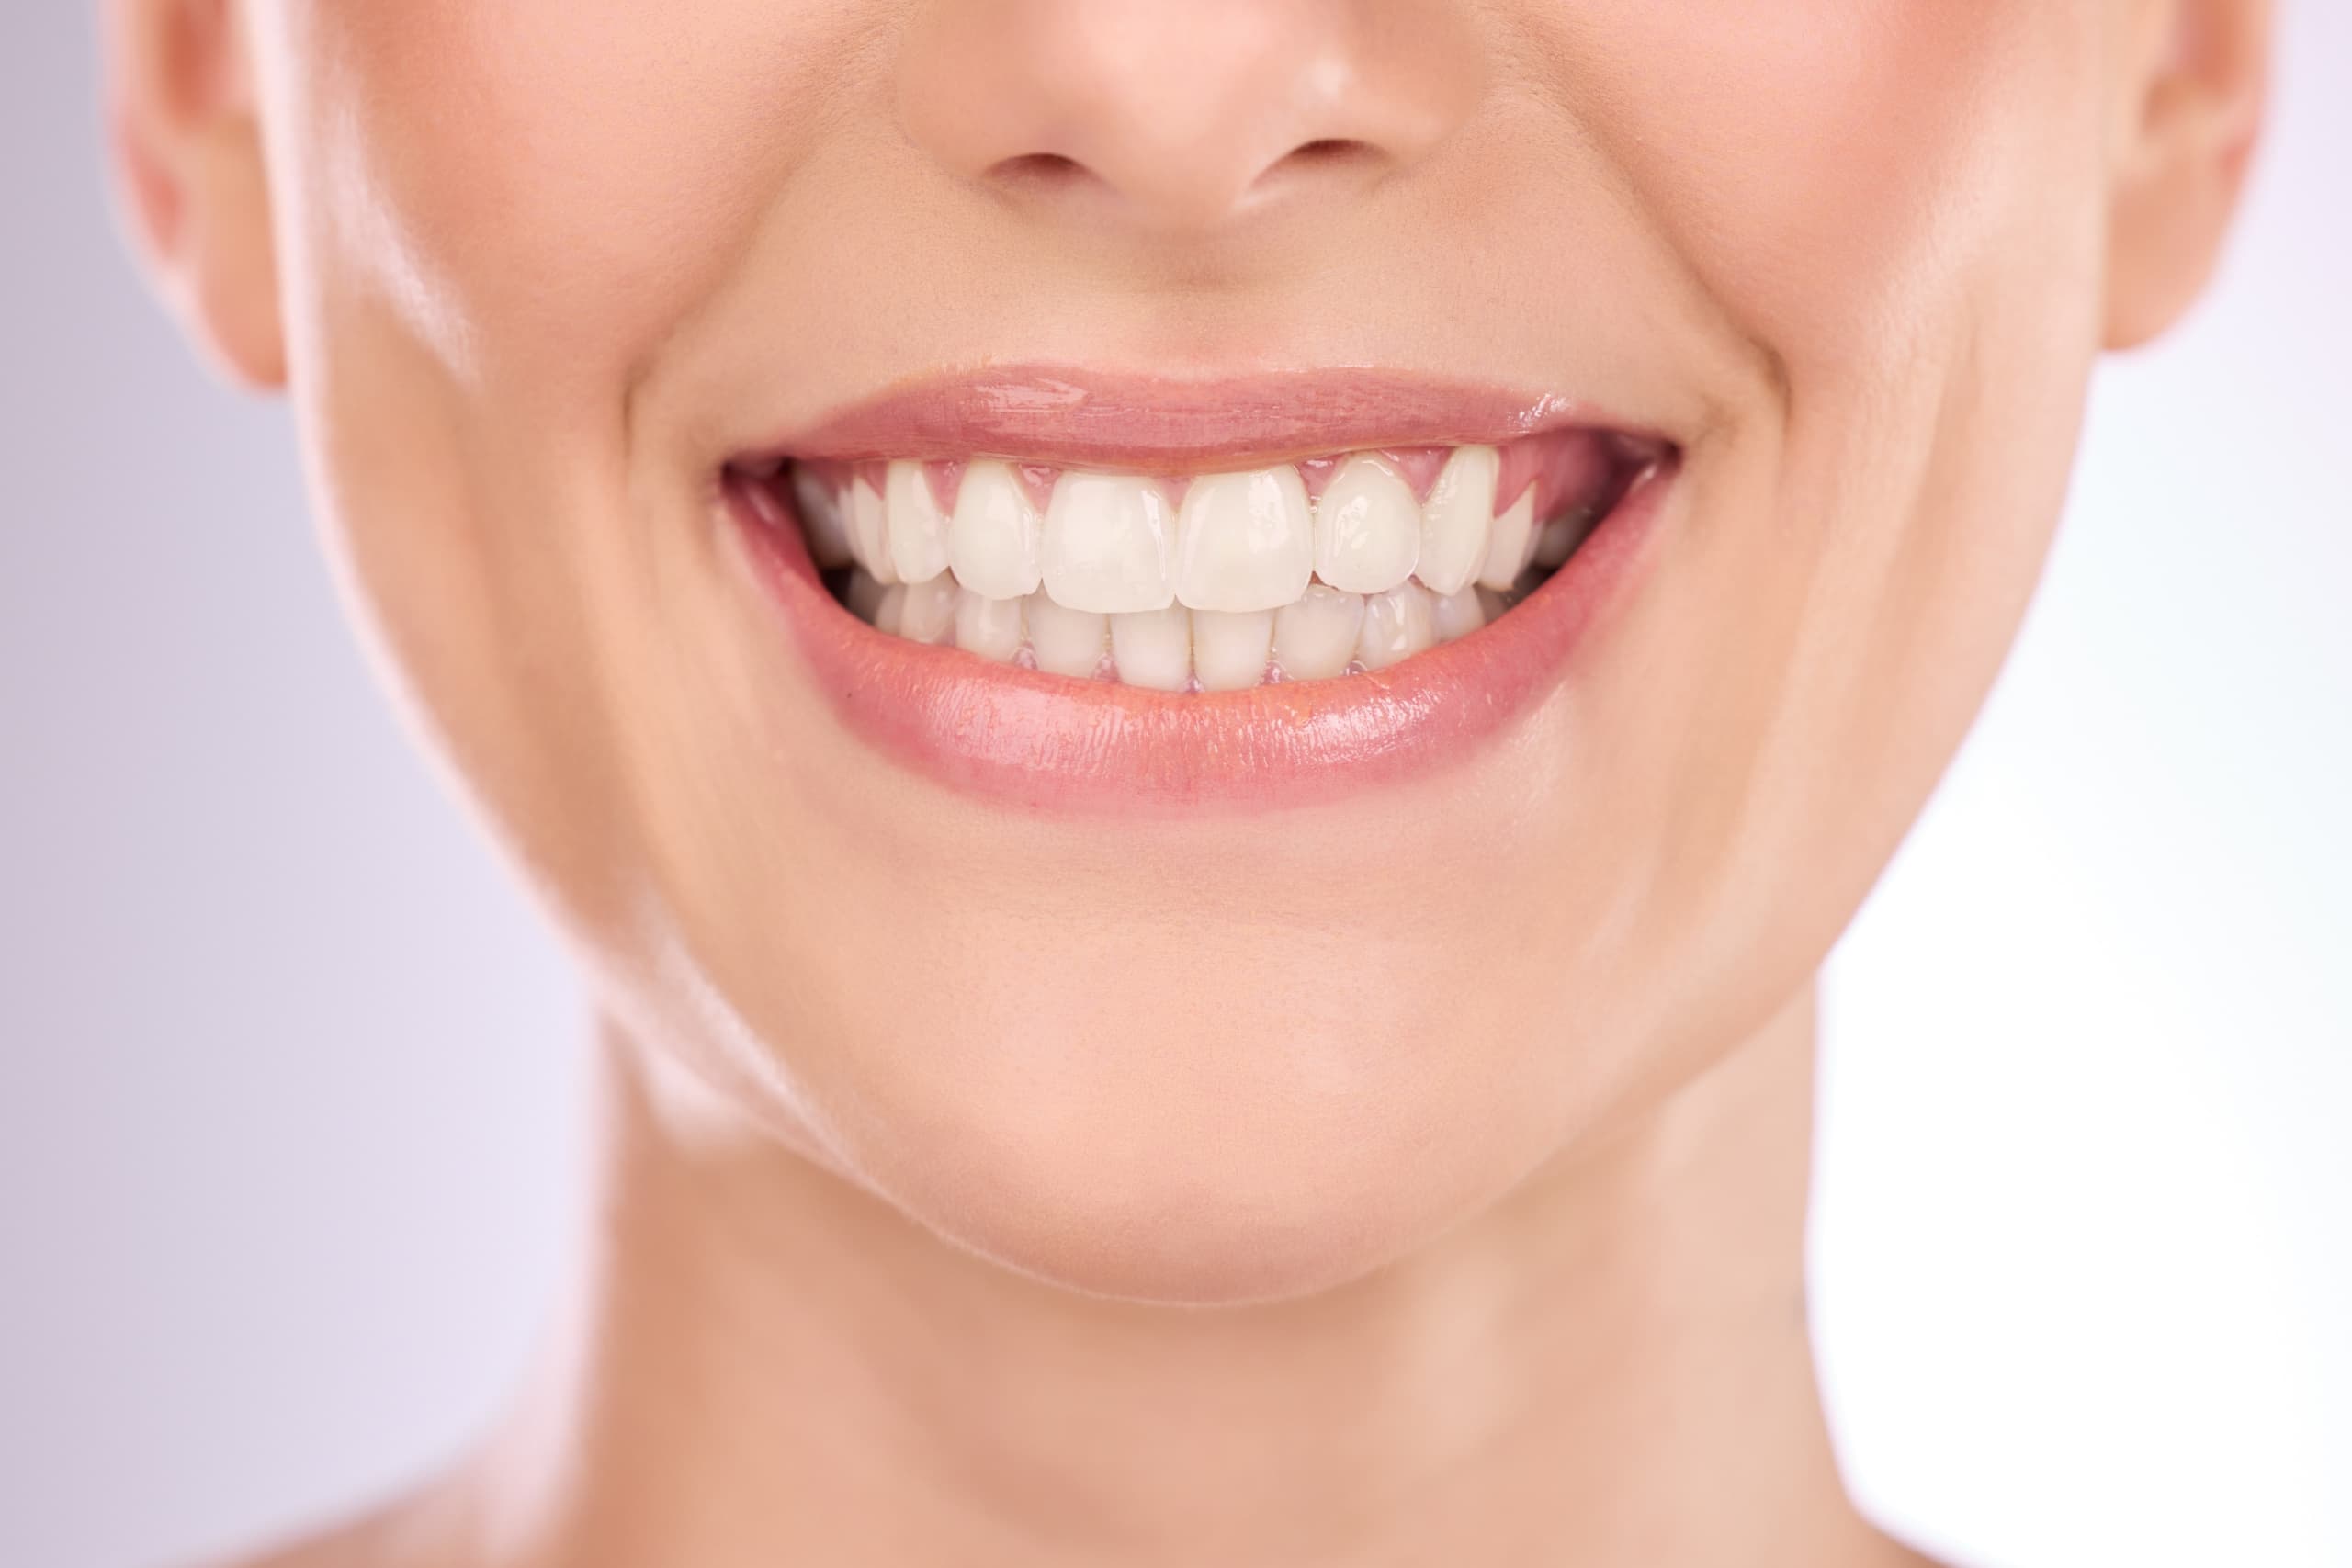 Woman with healthy teeth smiling